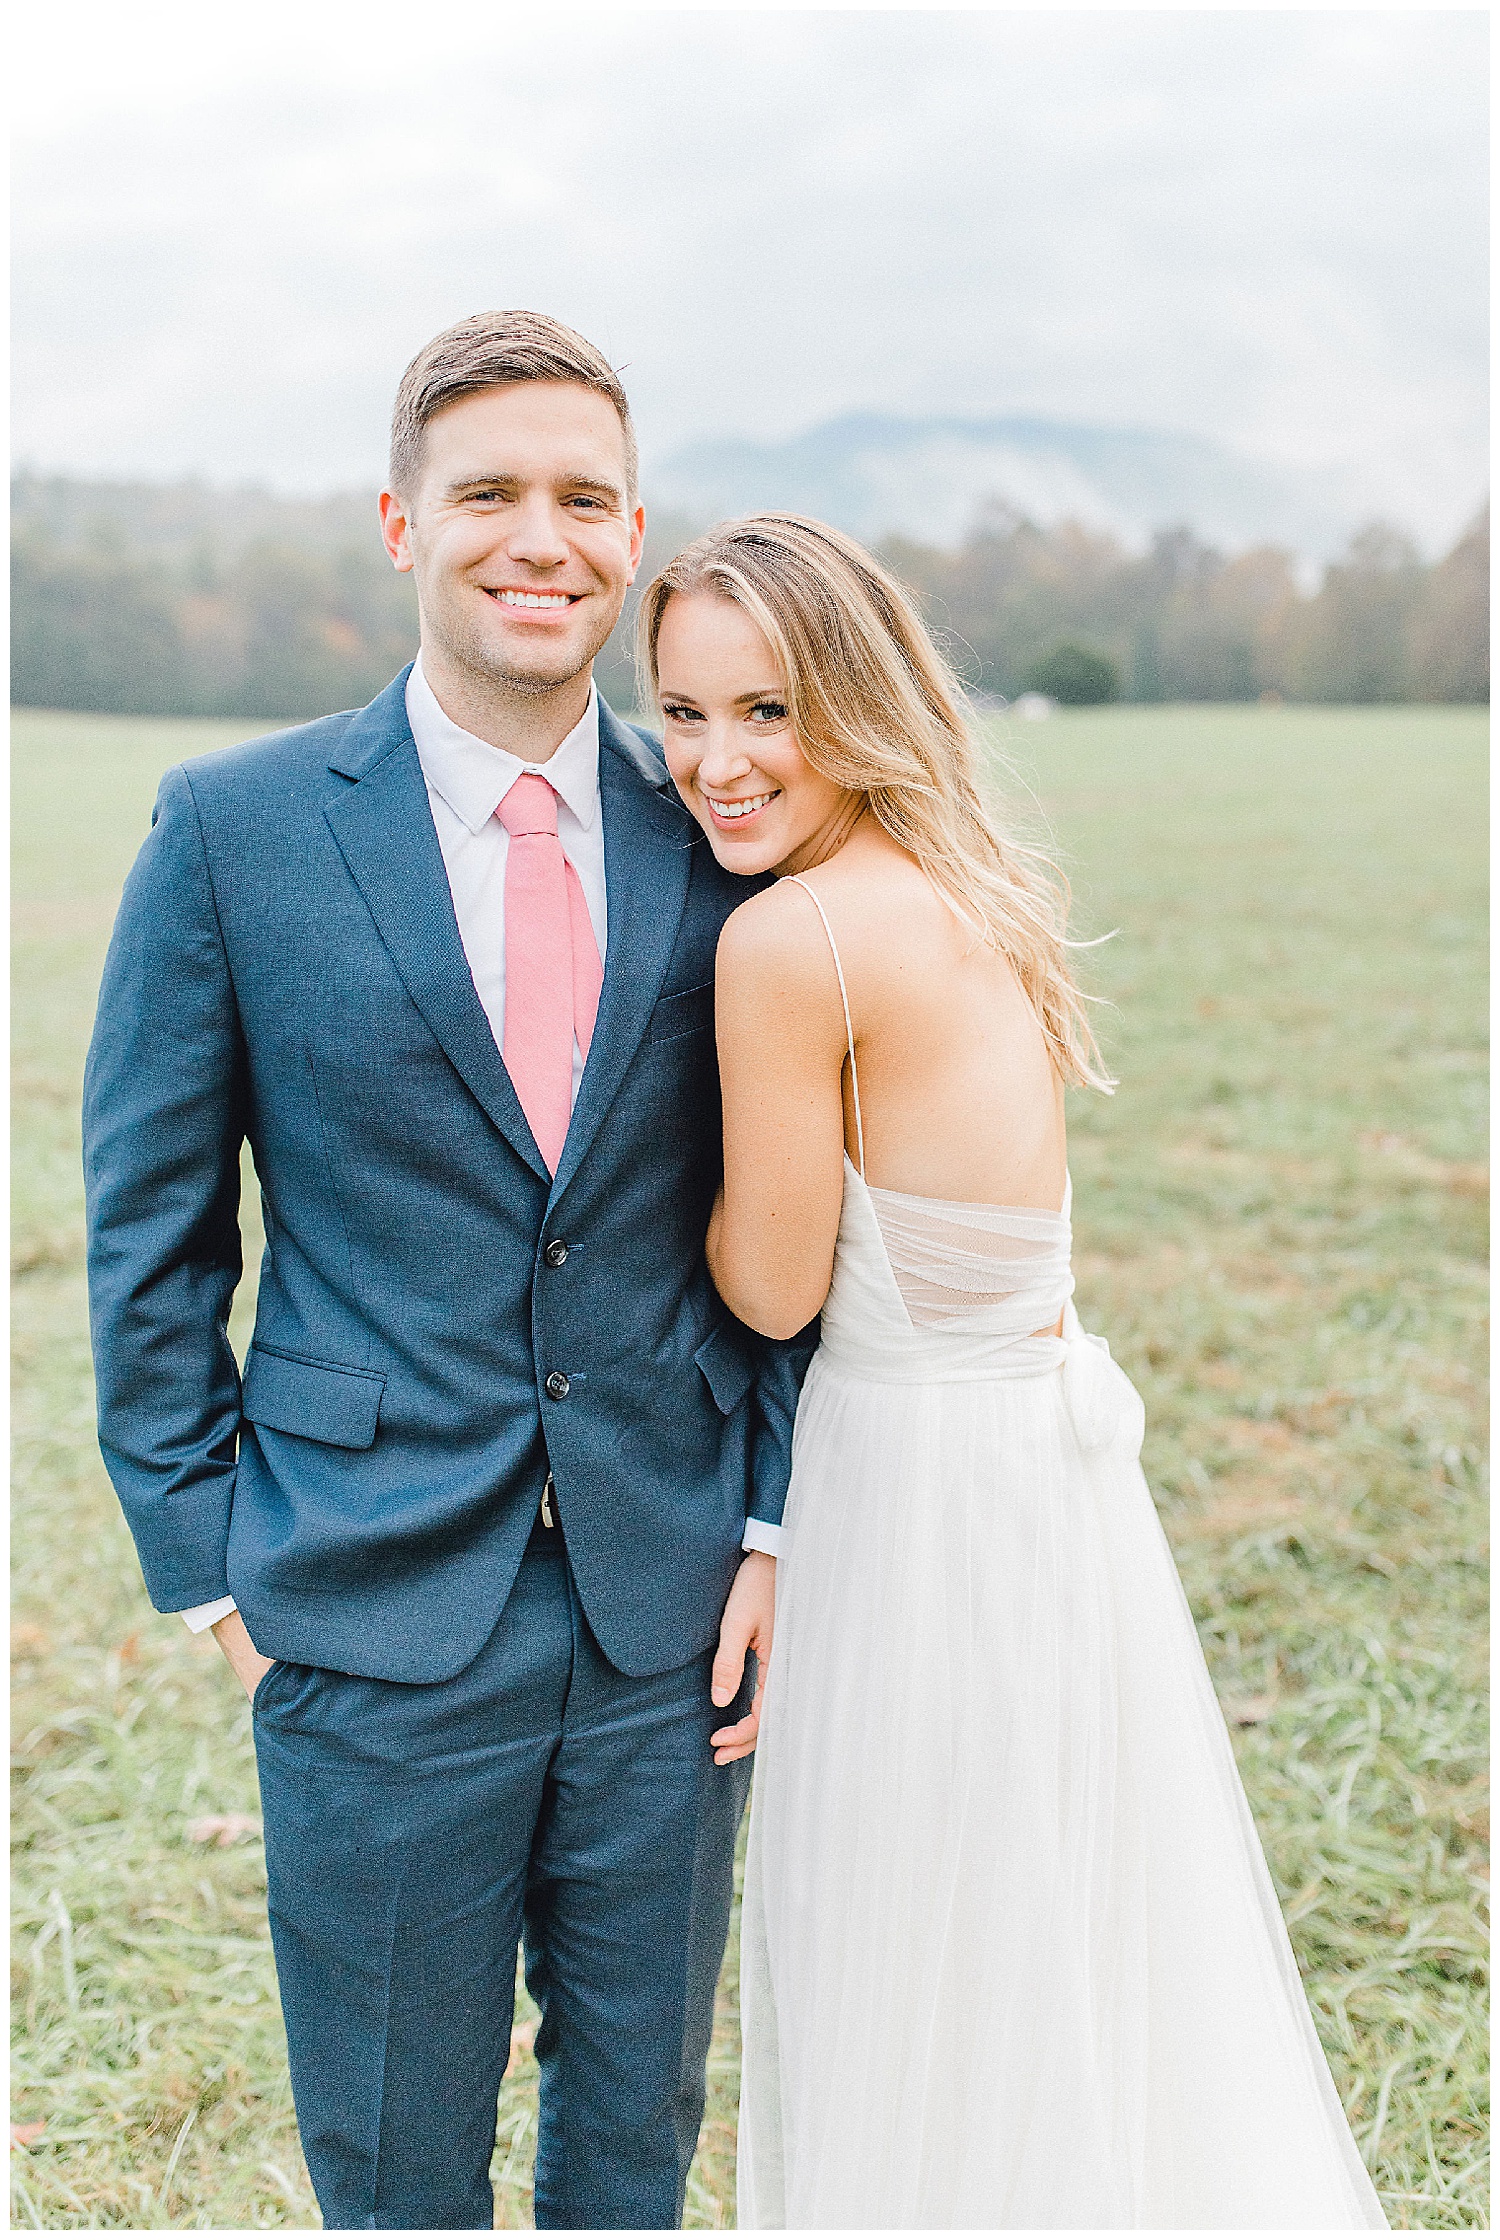 Emma Rose Company recently got to travel all the way to Nashville to photograph the most beautiful post-wedding bride and groom portraits in the Great Smoky Mountains with a gorgeous couple! Nashville wedding inspiration at it's finest._0026.jpg